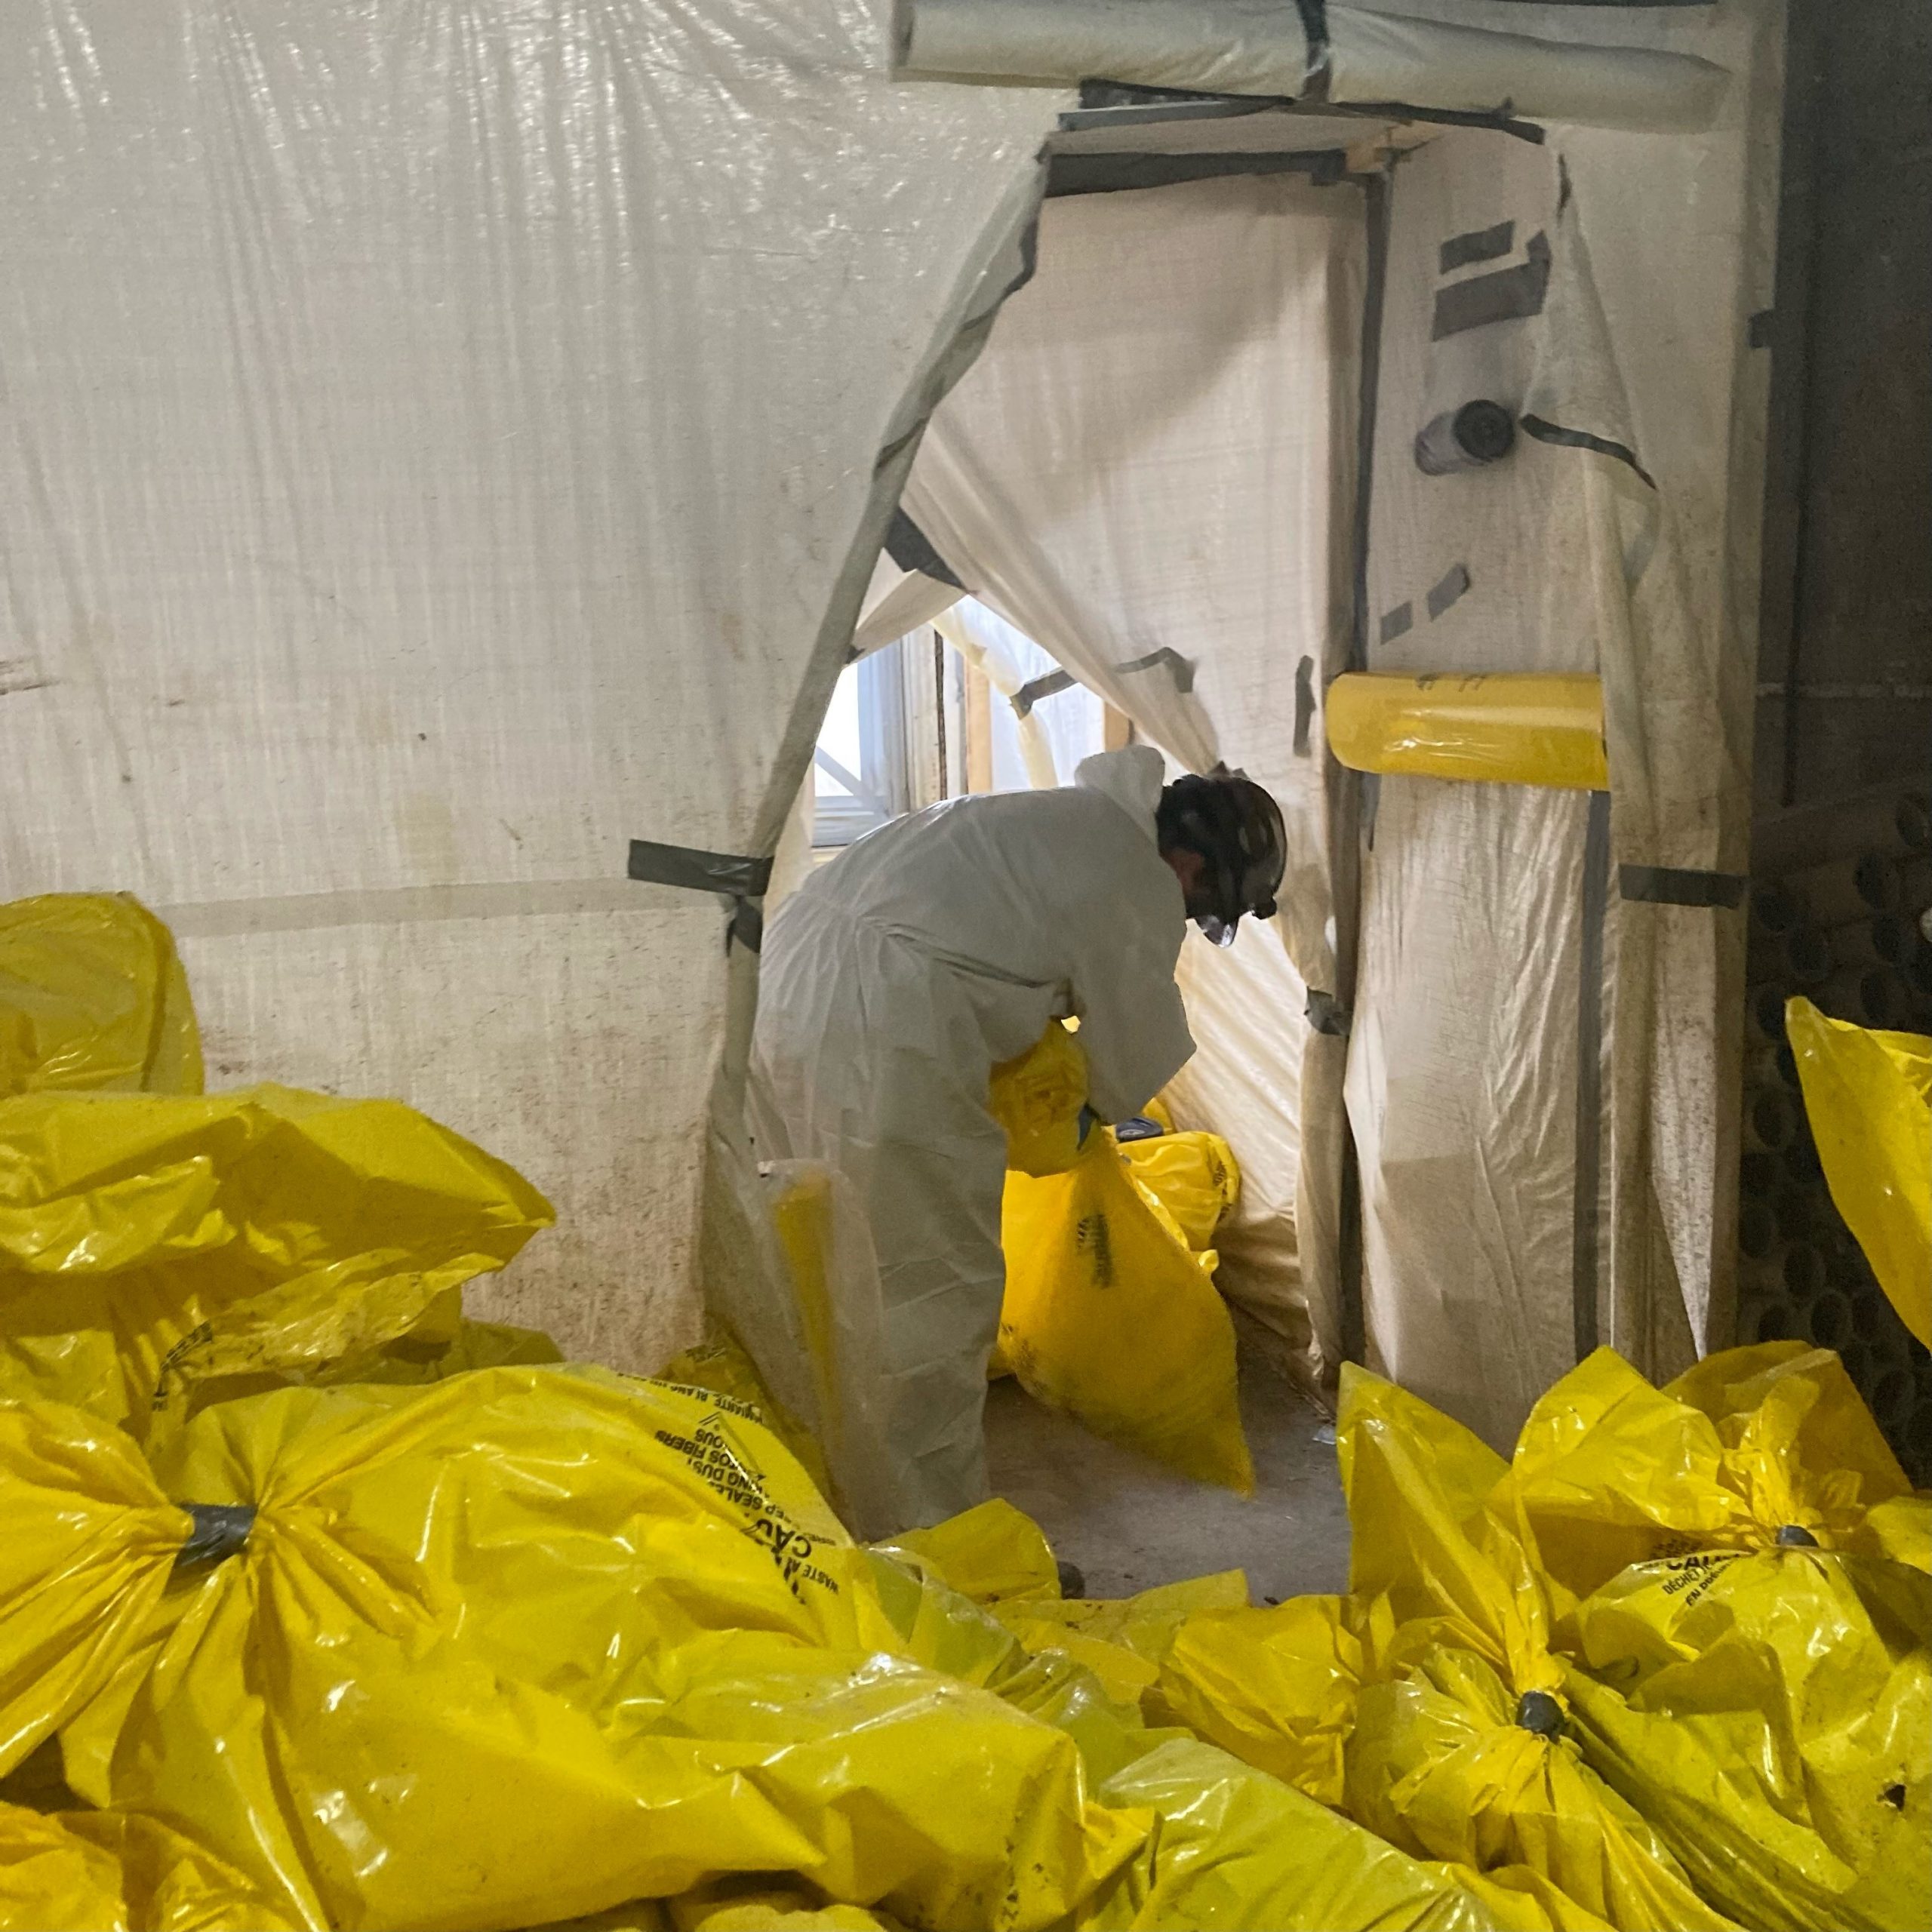 A photo of a person ting large yellow bags